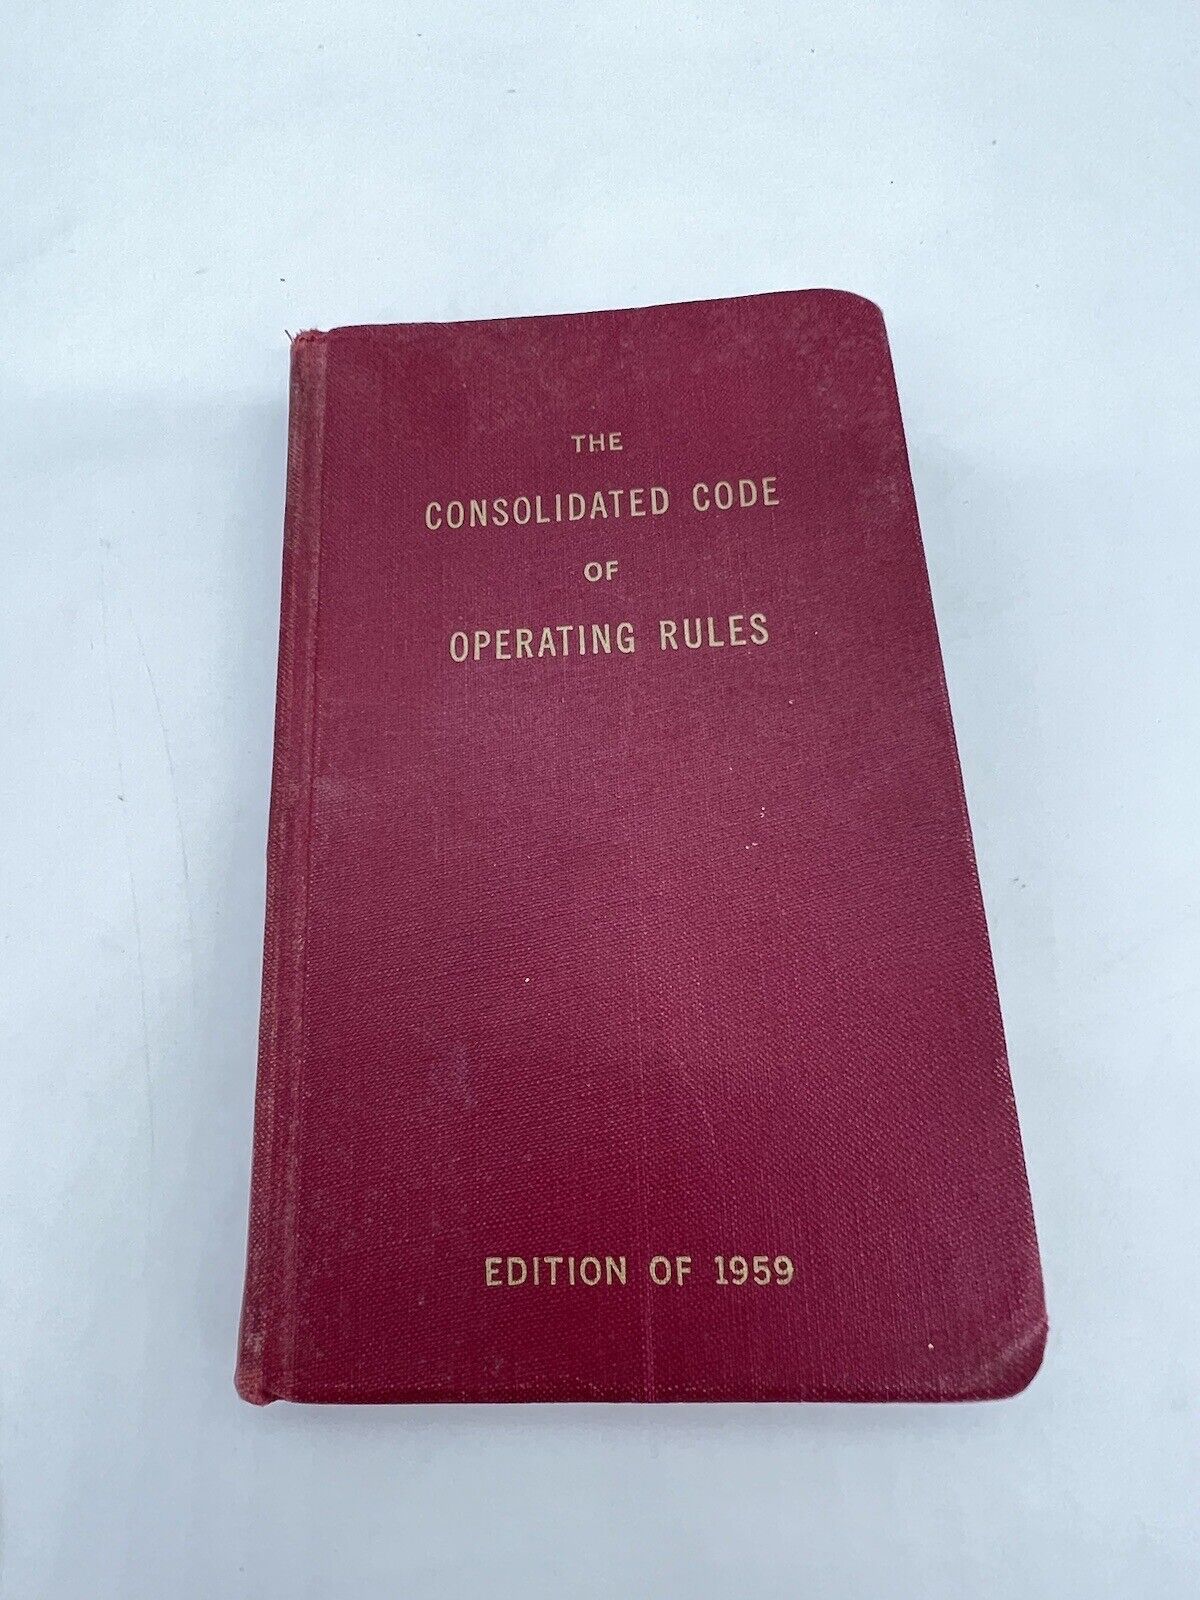 Railroad THE CONSOLIDATED CODE of OPERATING Rules 1959 Ed. Chicago Milwaukee